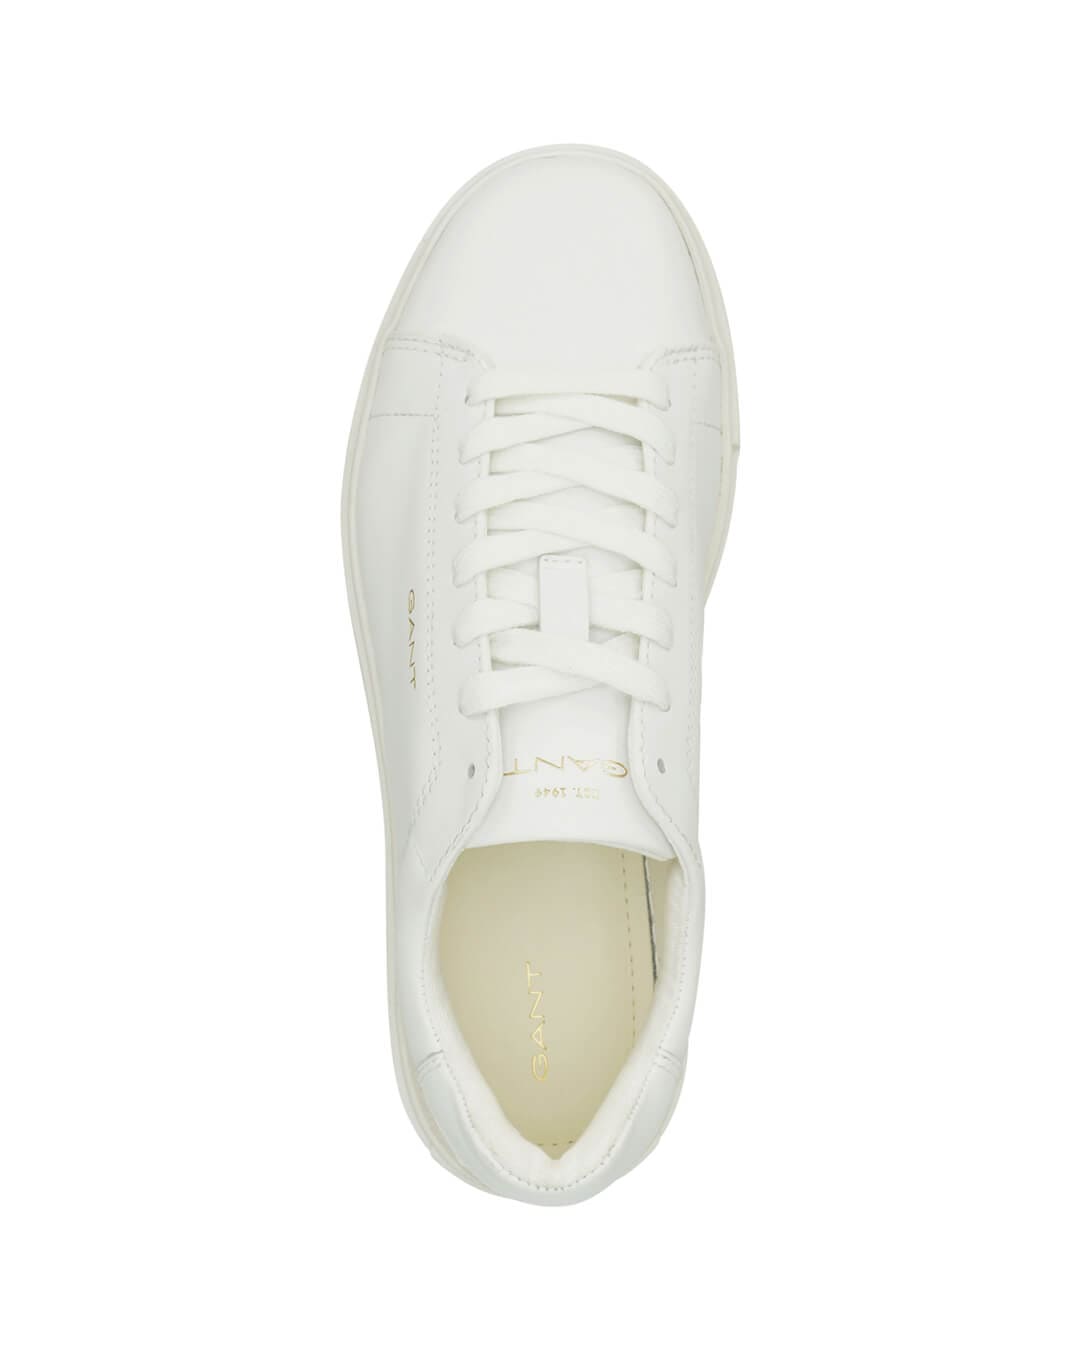 Gant Shoes Gant Off White Julice Sneakers